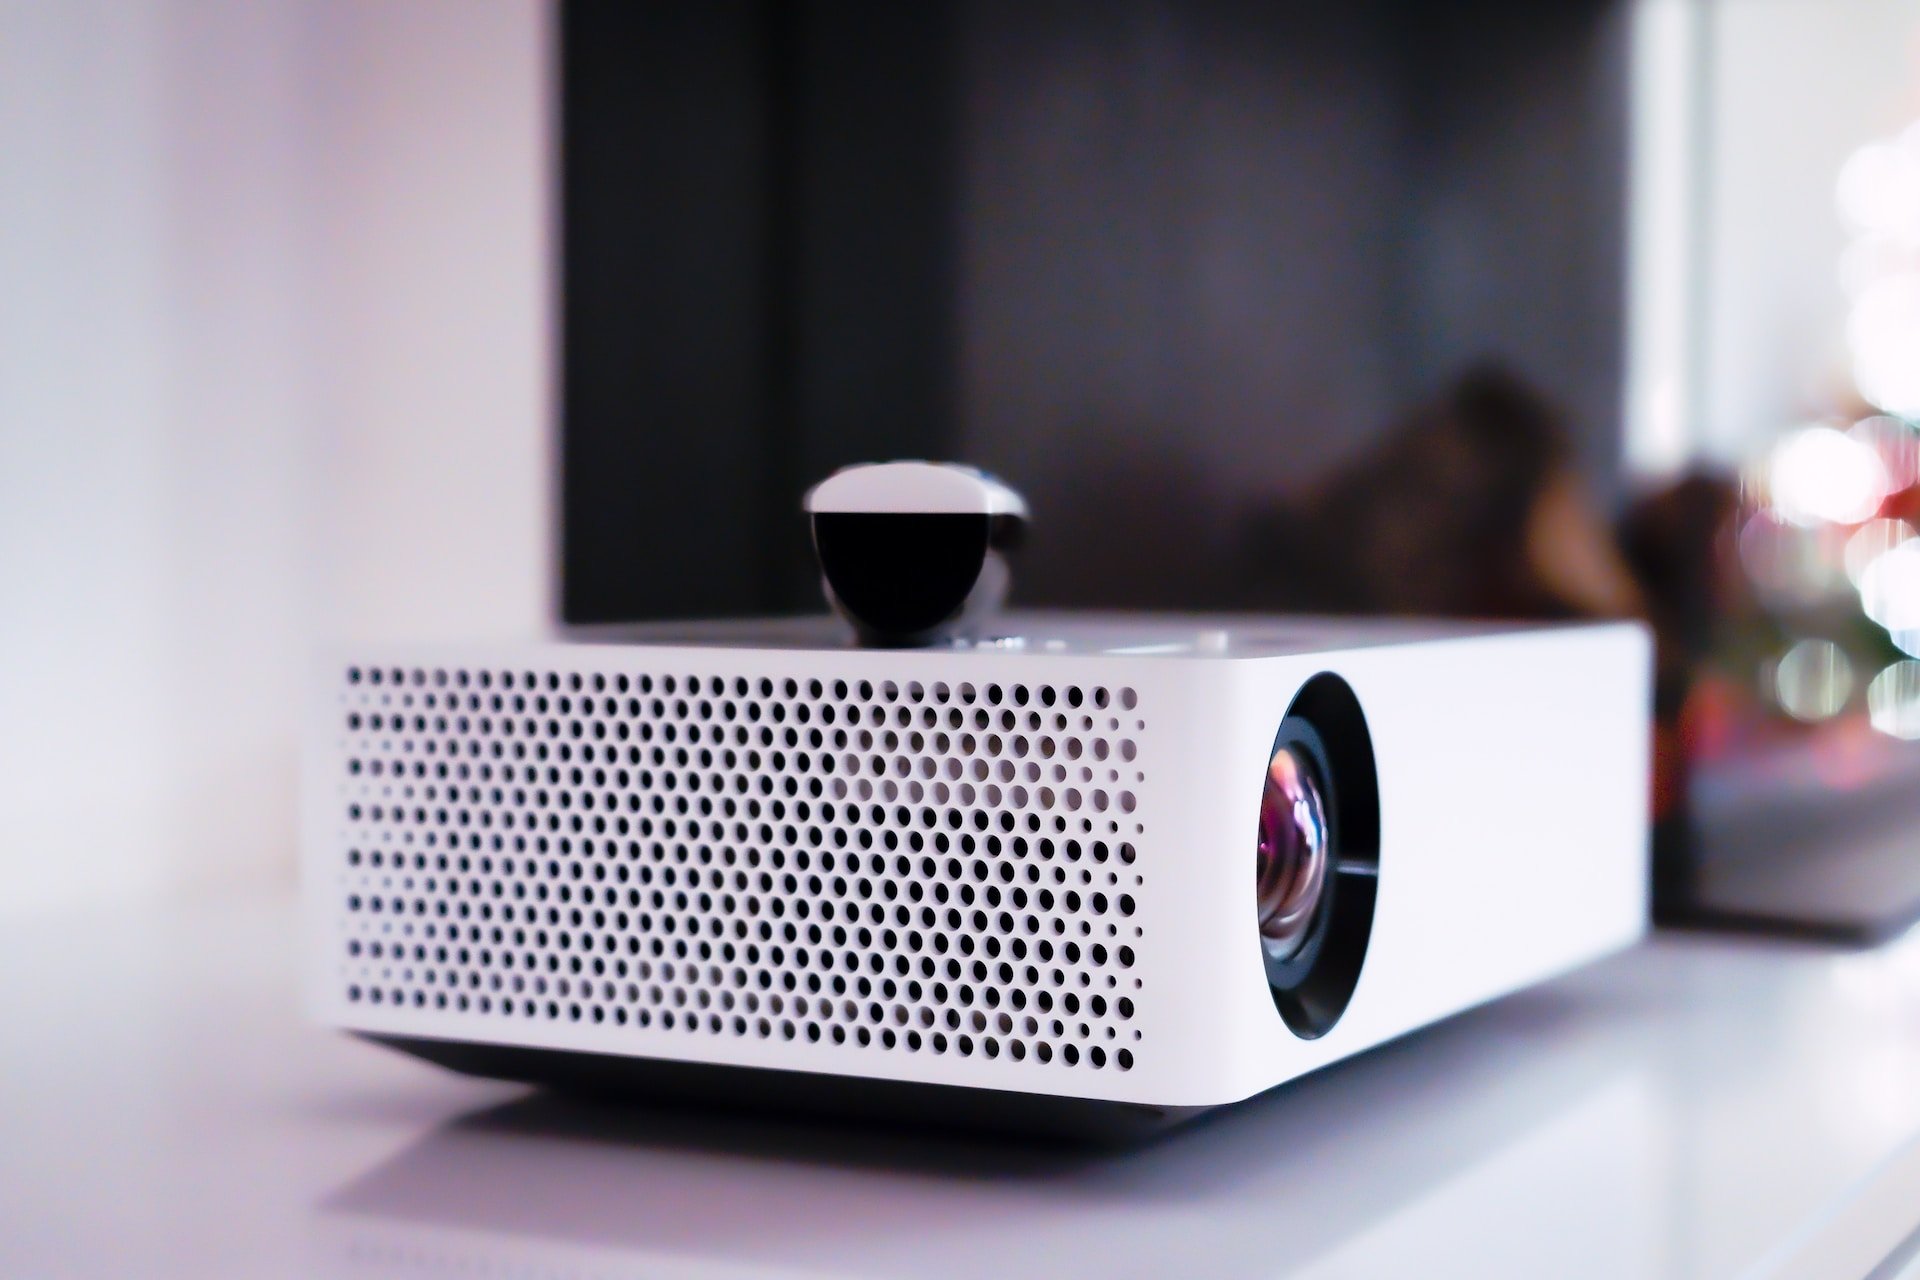 The Best Sony Projectors